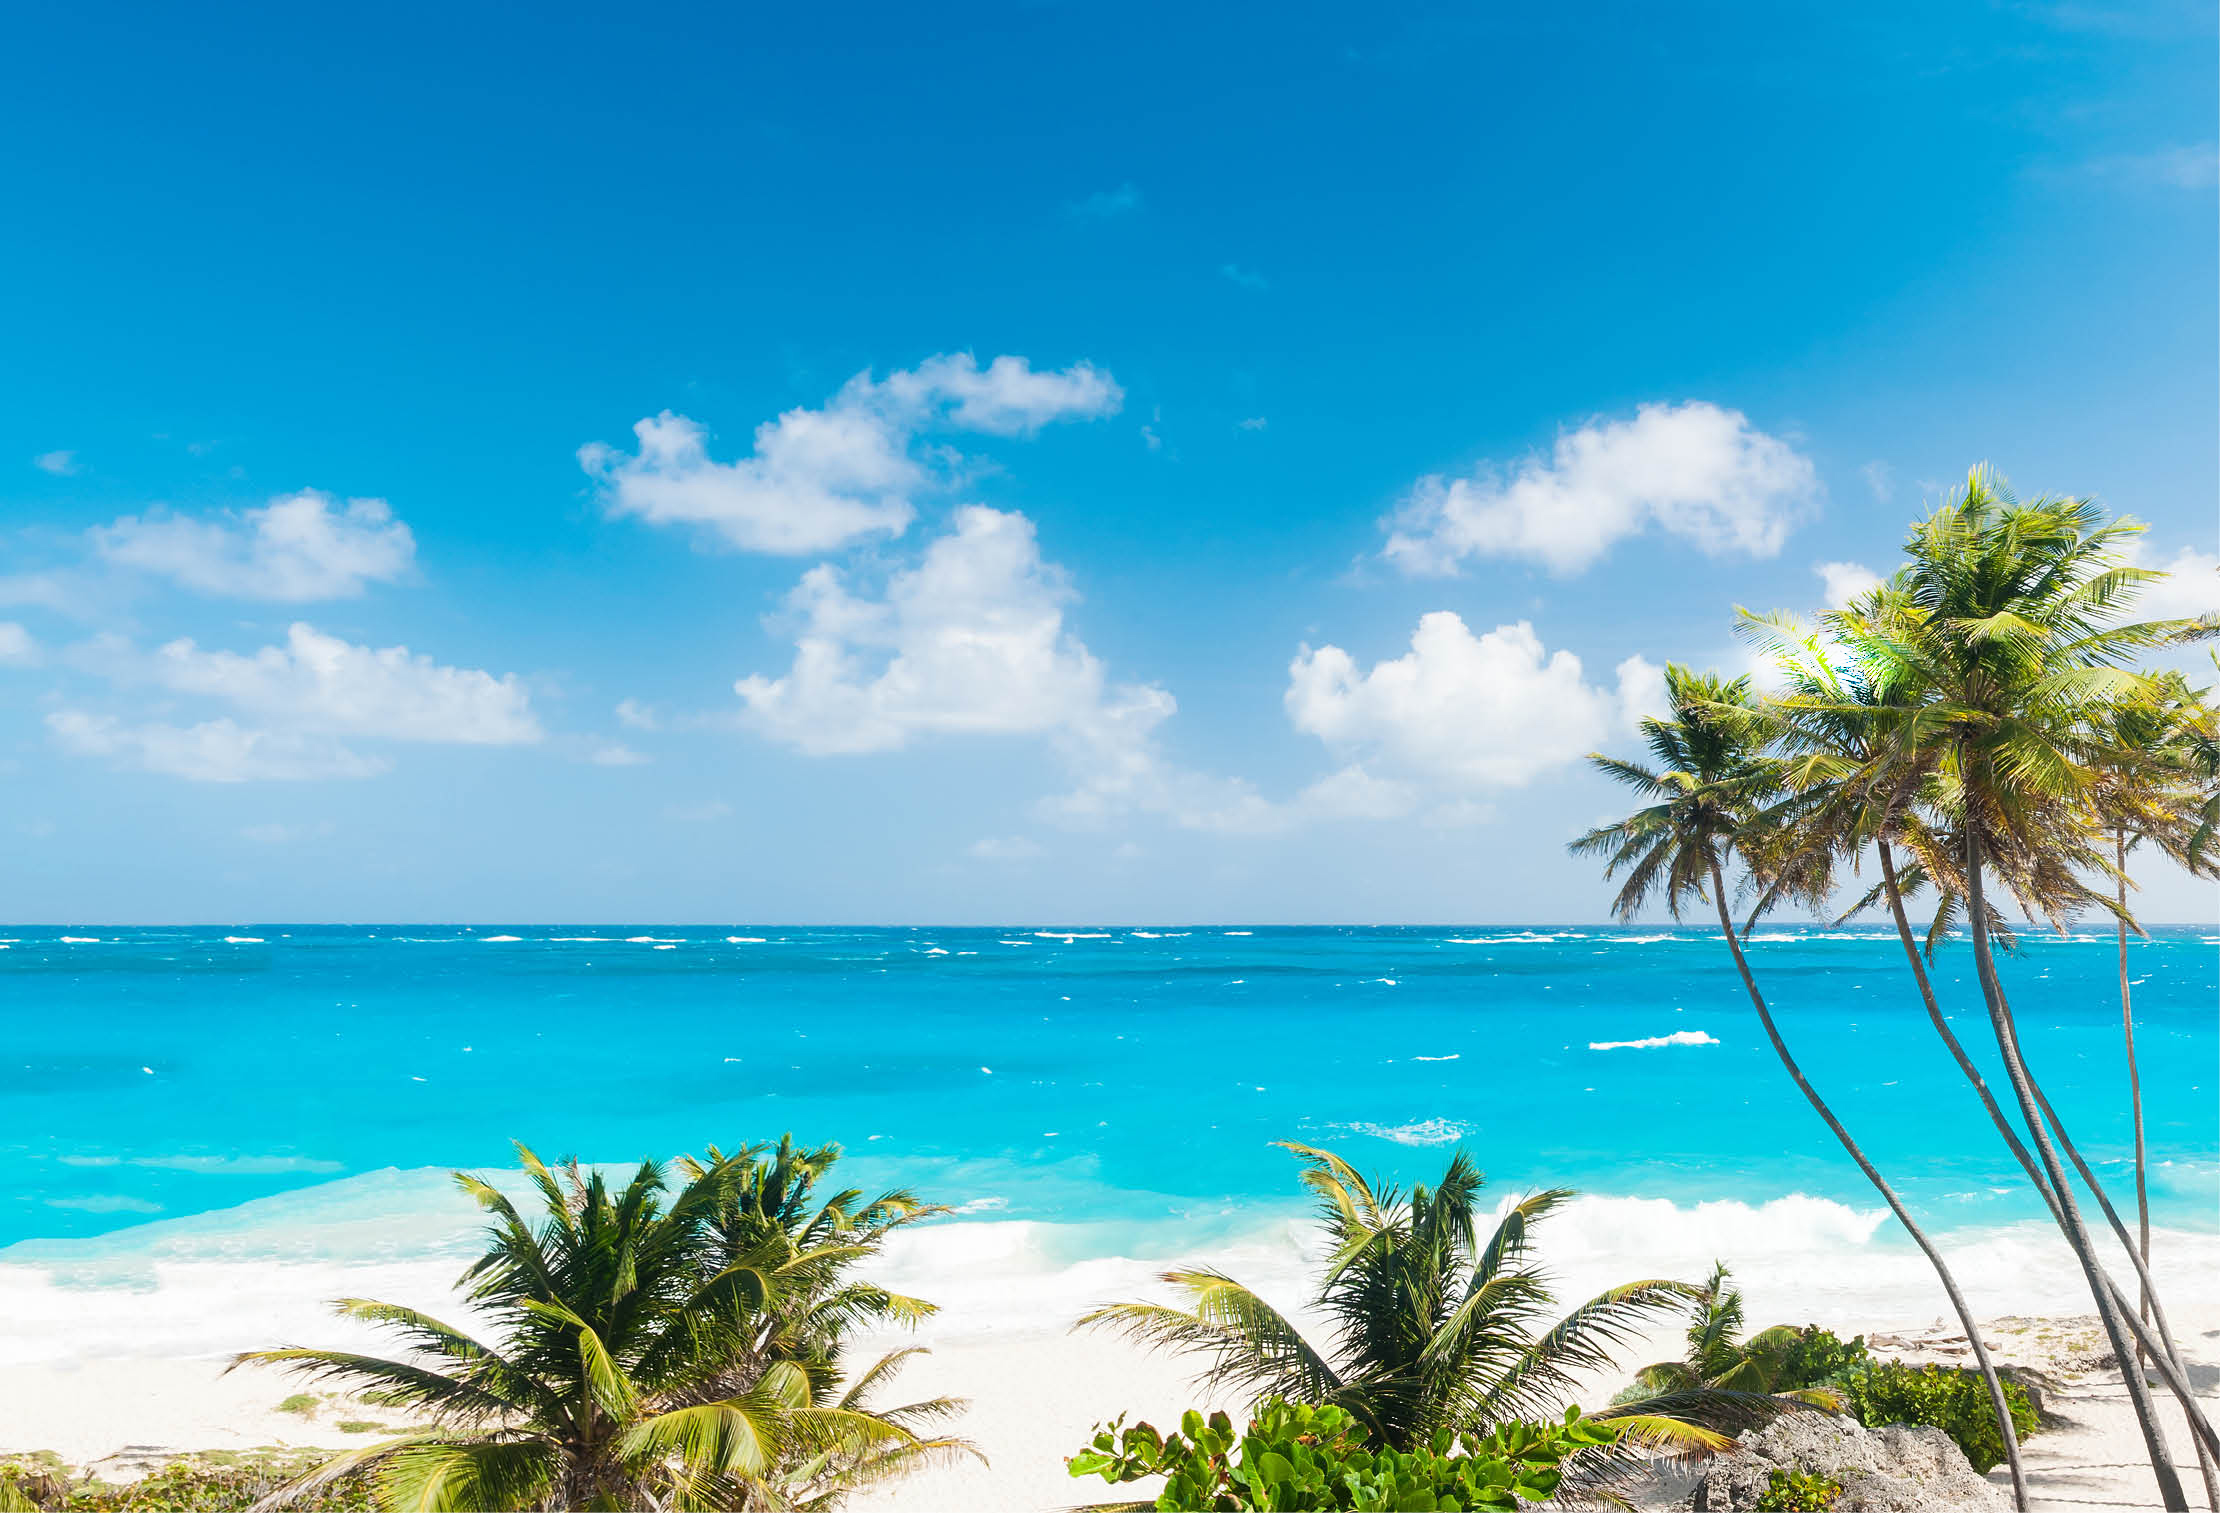 Bottom Bay is one of the most beautiful beaches on the Caribbean island of Barbados  It is a tropical paradise with palms hanging over turquoise sea  Wide panoramic photo